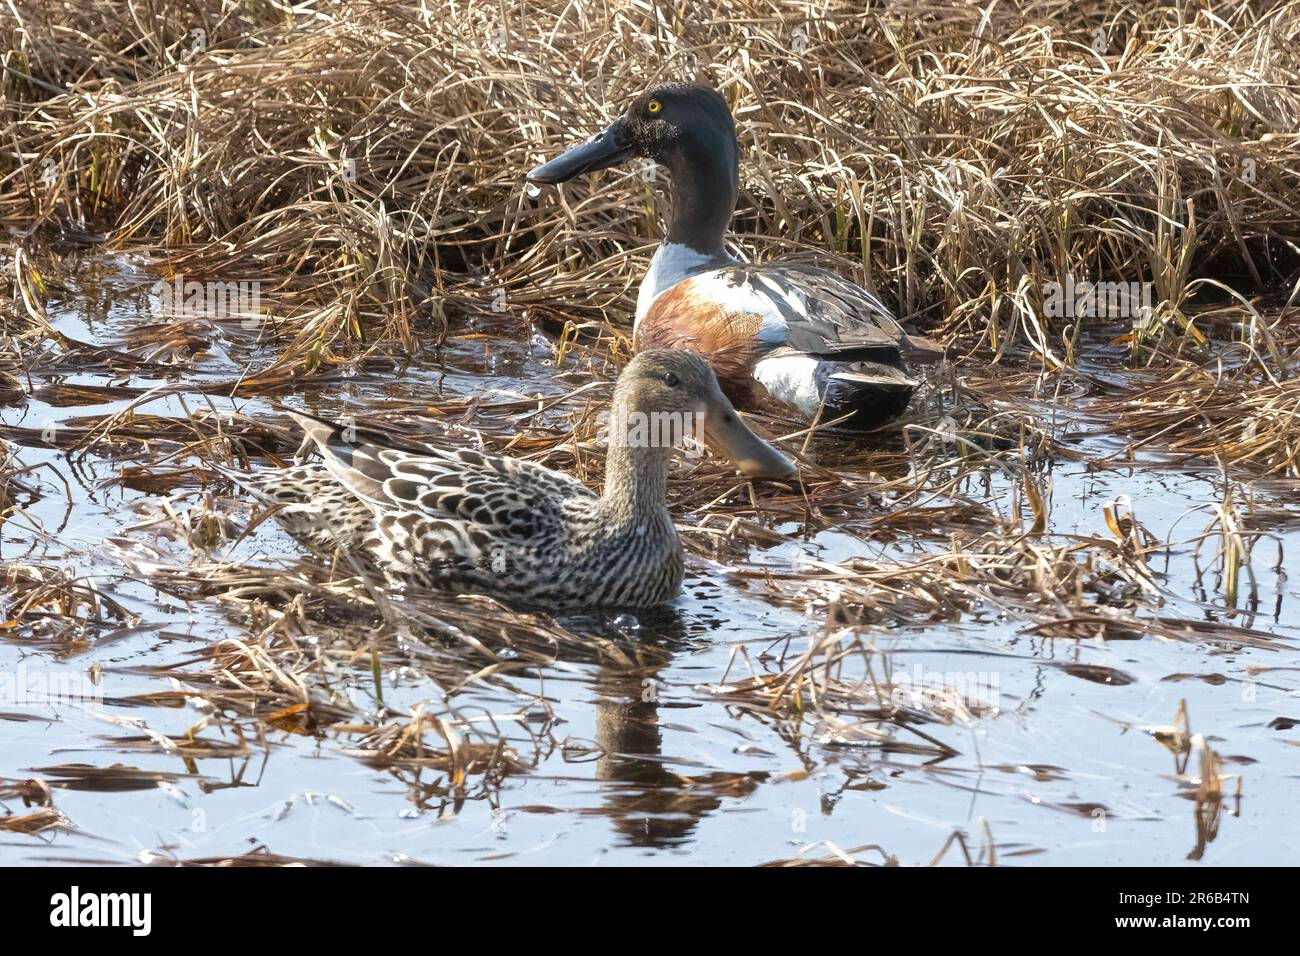 A northern shoveler (Spatula clypeata)and a duck swimming in a pond Stock Photo